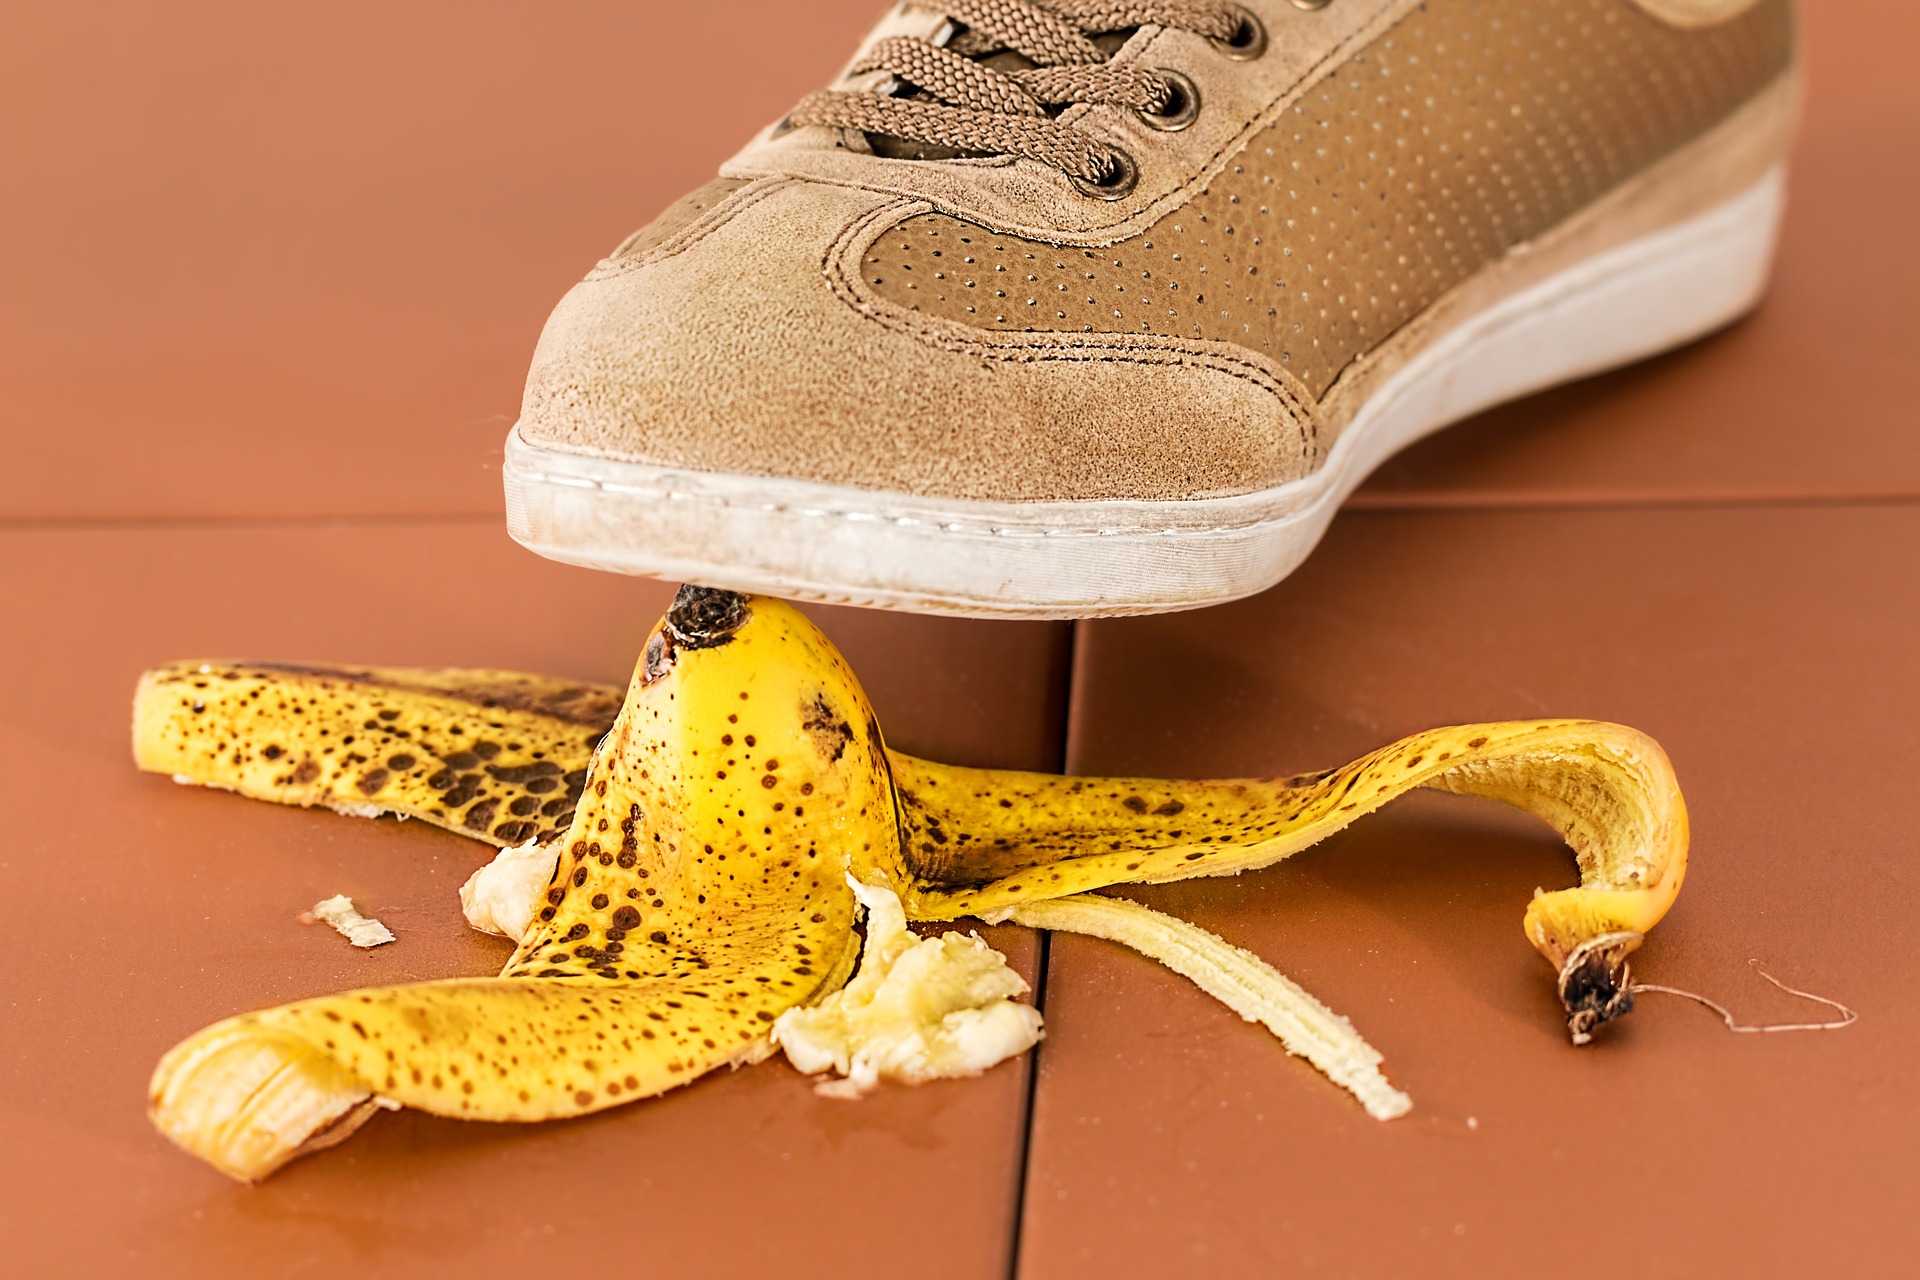 A shoe coming down on a banana peel, published to: "The Biggest Web Design Mistakes Small Businesses Make"